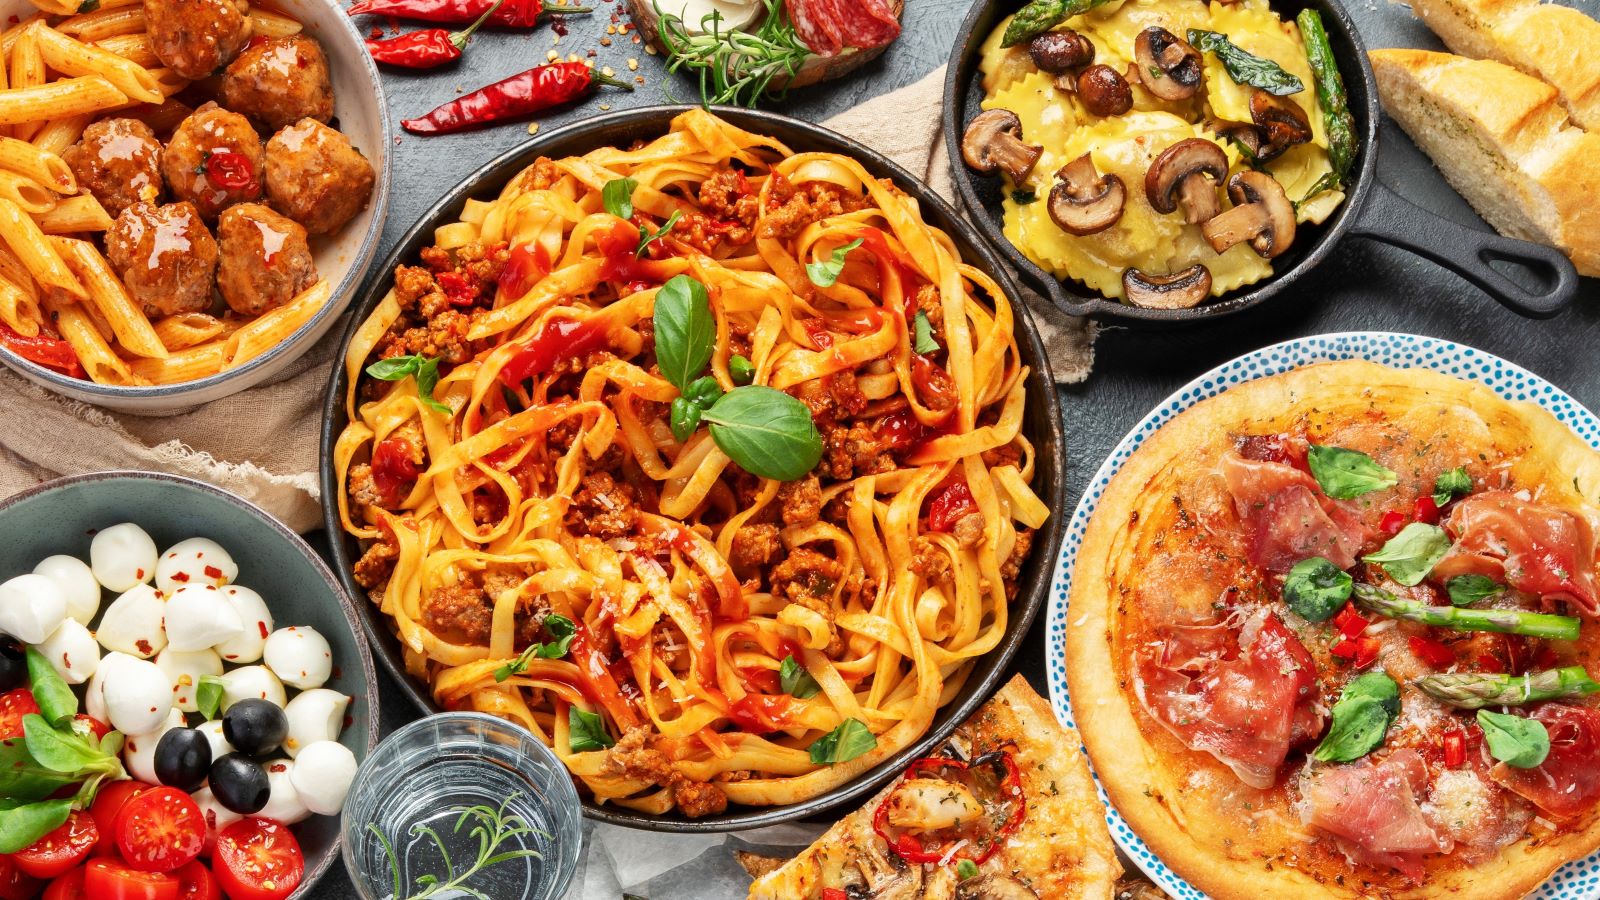 Italian food has a reputation for being high in fat, carbs and sodium. So how do you maintain your diet while eating at Italian restaurants?